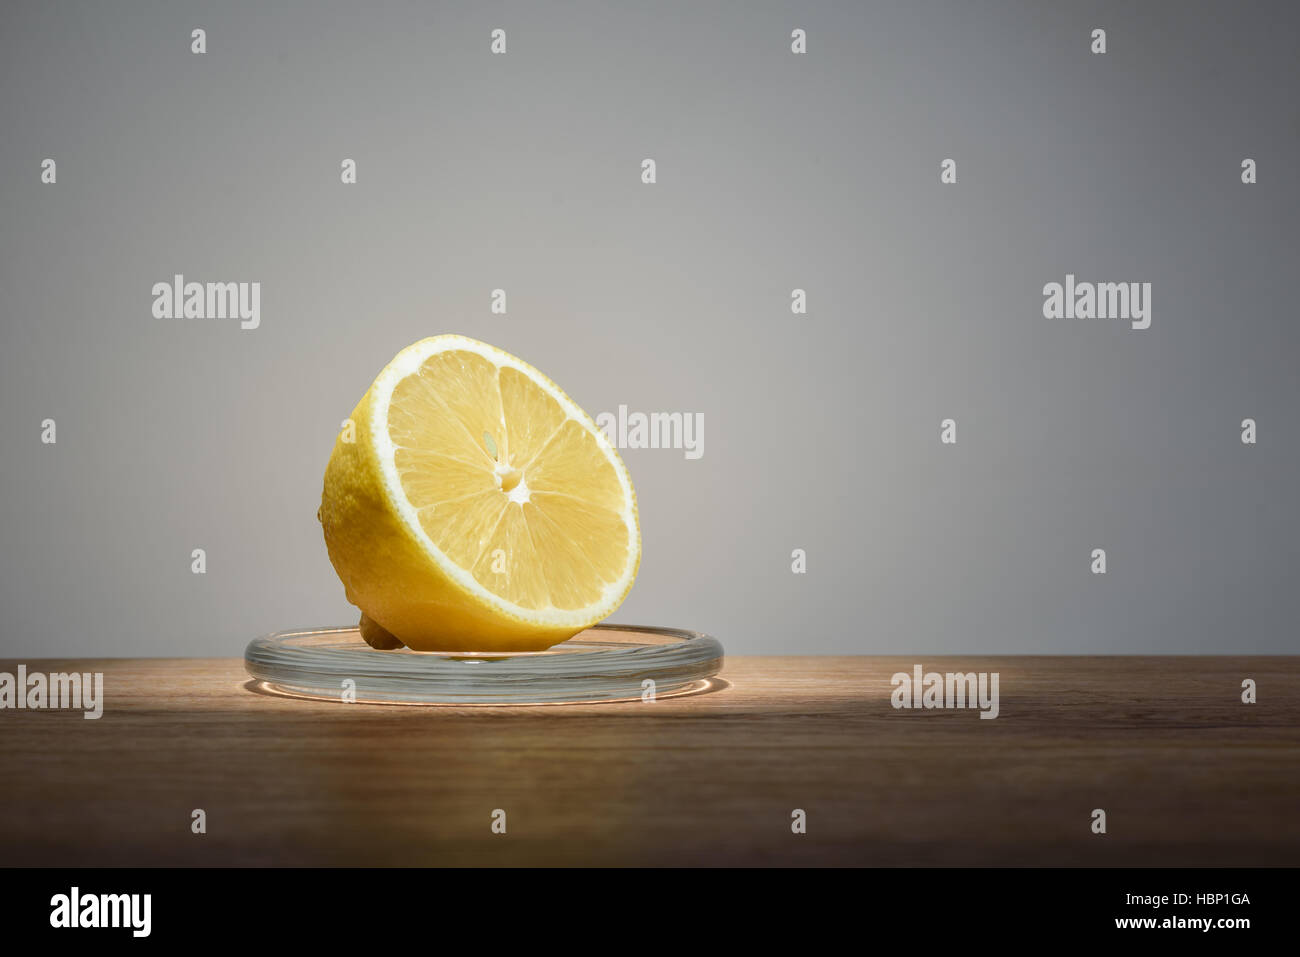 Juicy half a lemon in a glass dish on wooden table on light background Stock Photo